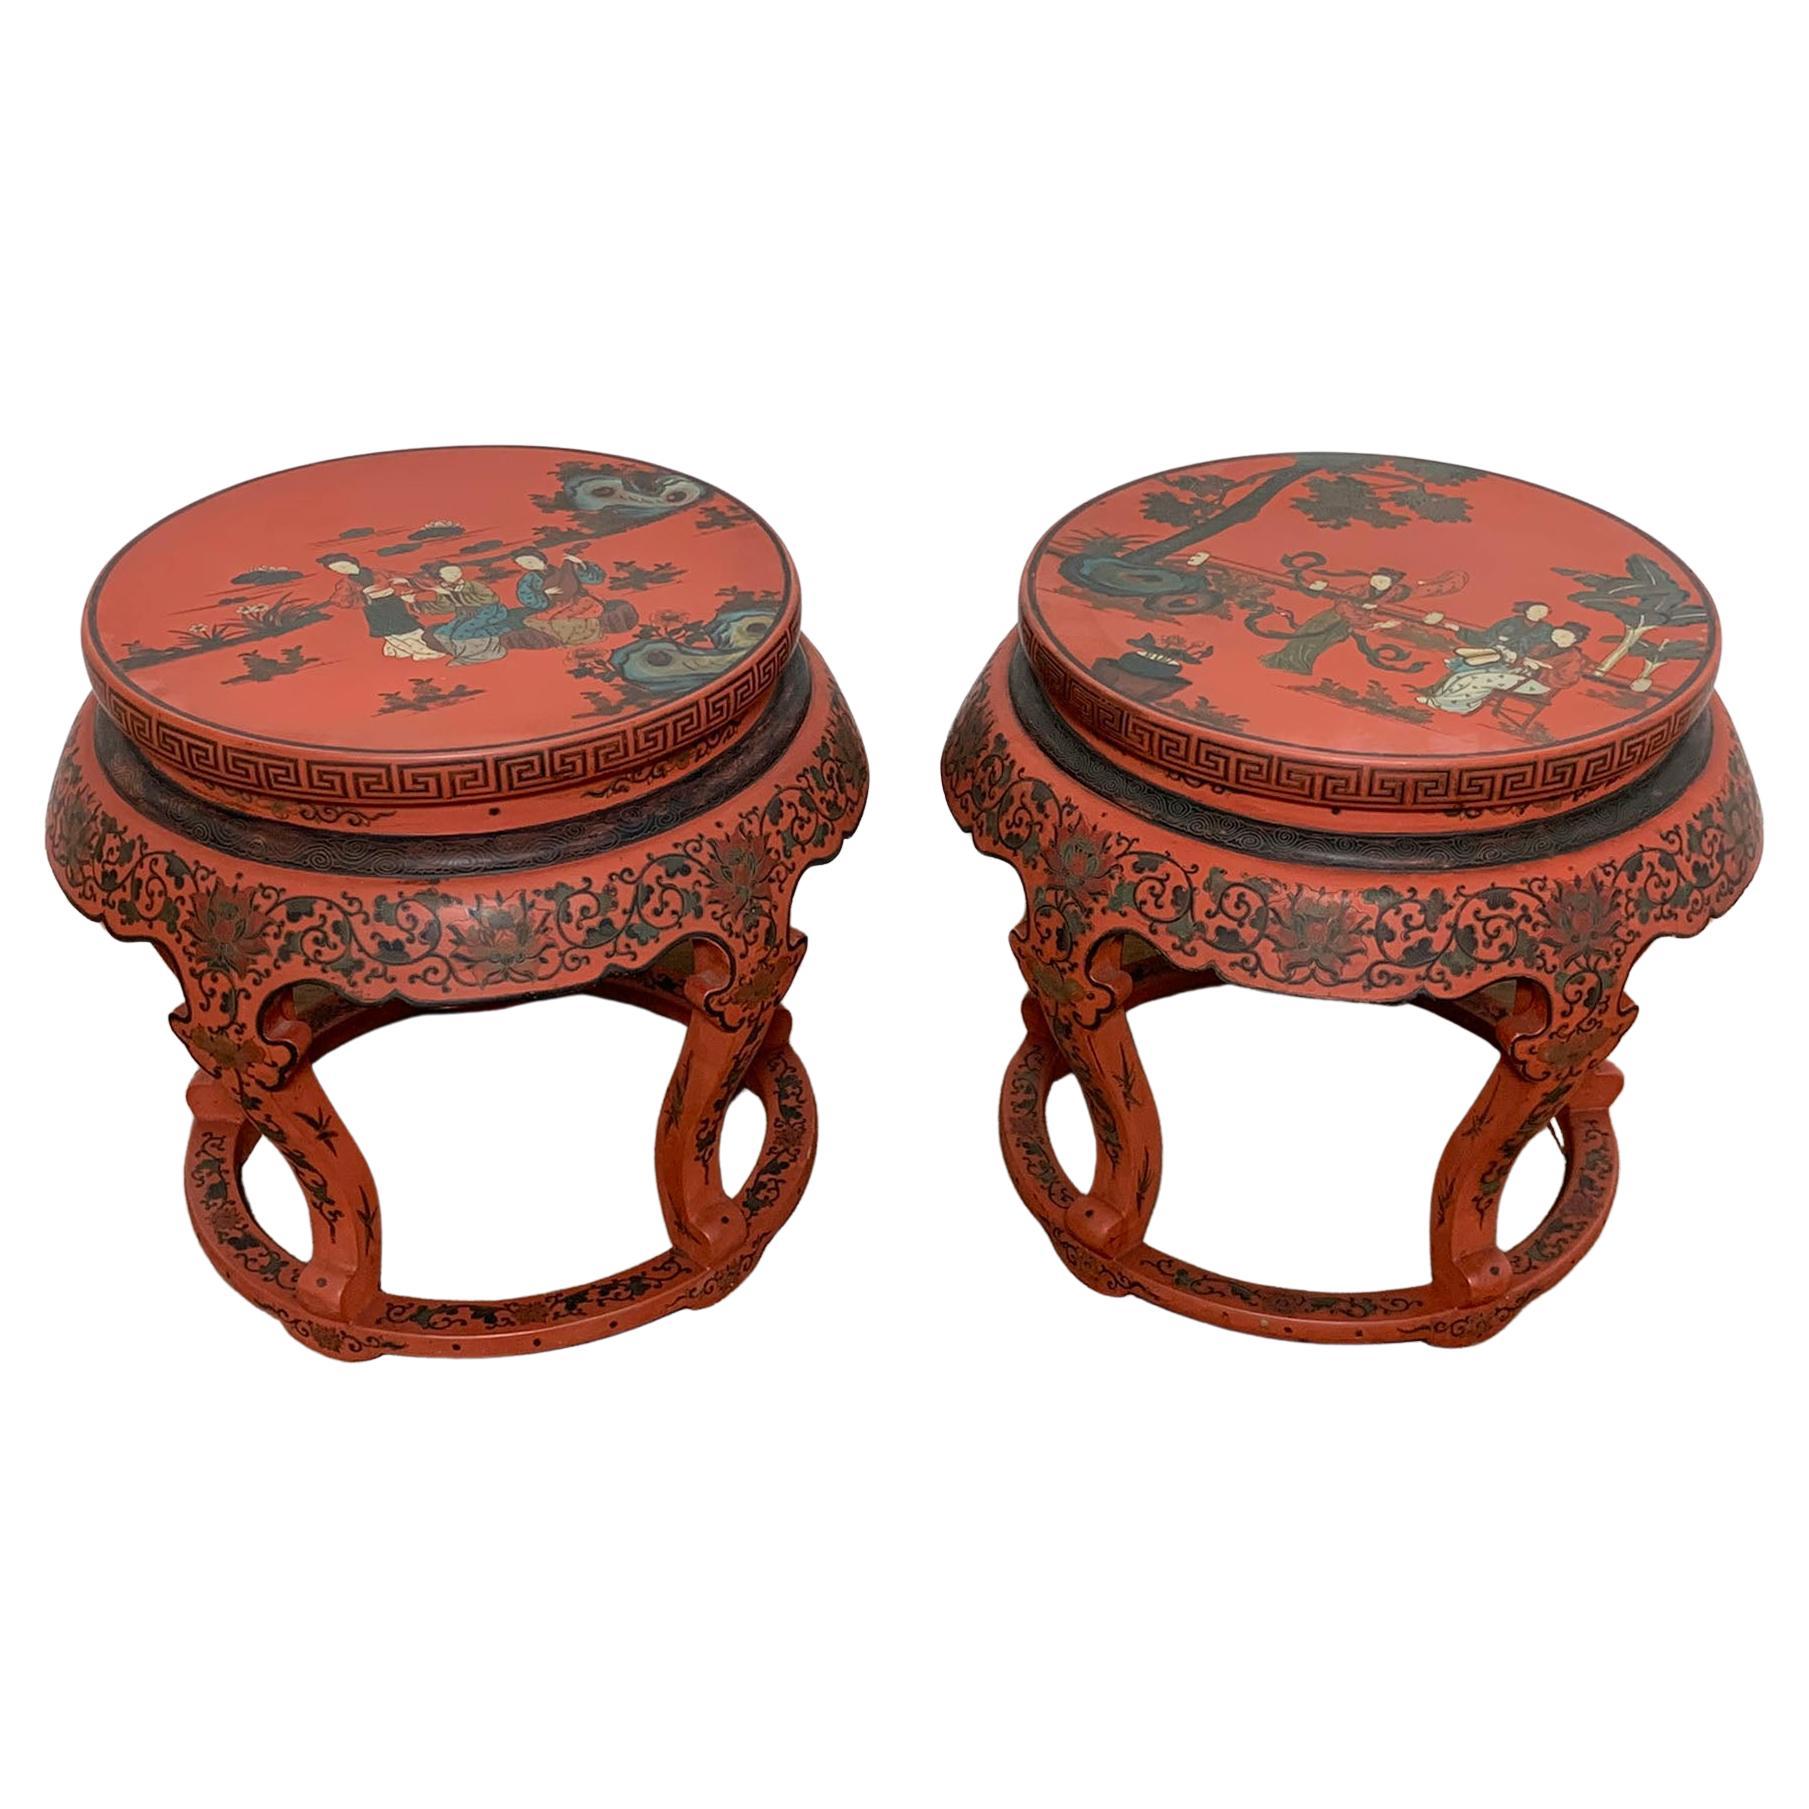 Pair of Antique Chinese Late Qing Dynasty Lacquered Drum Stools or Tables